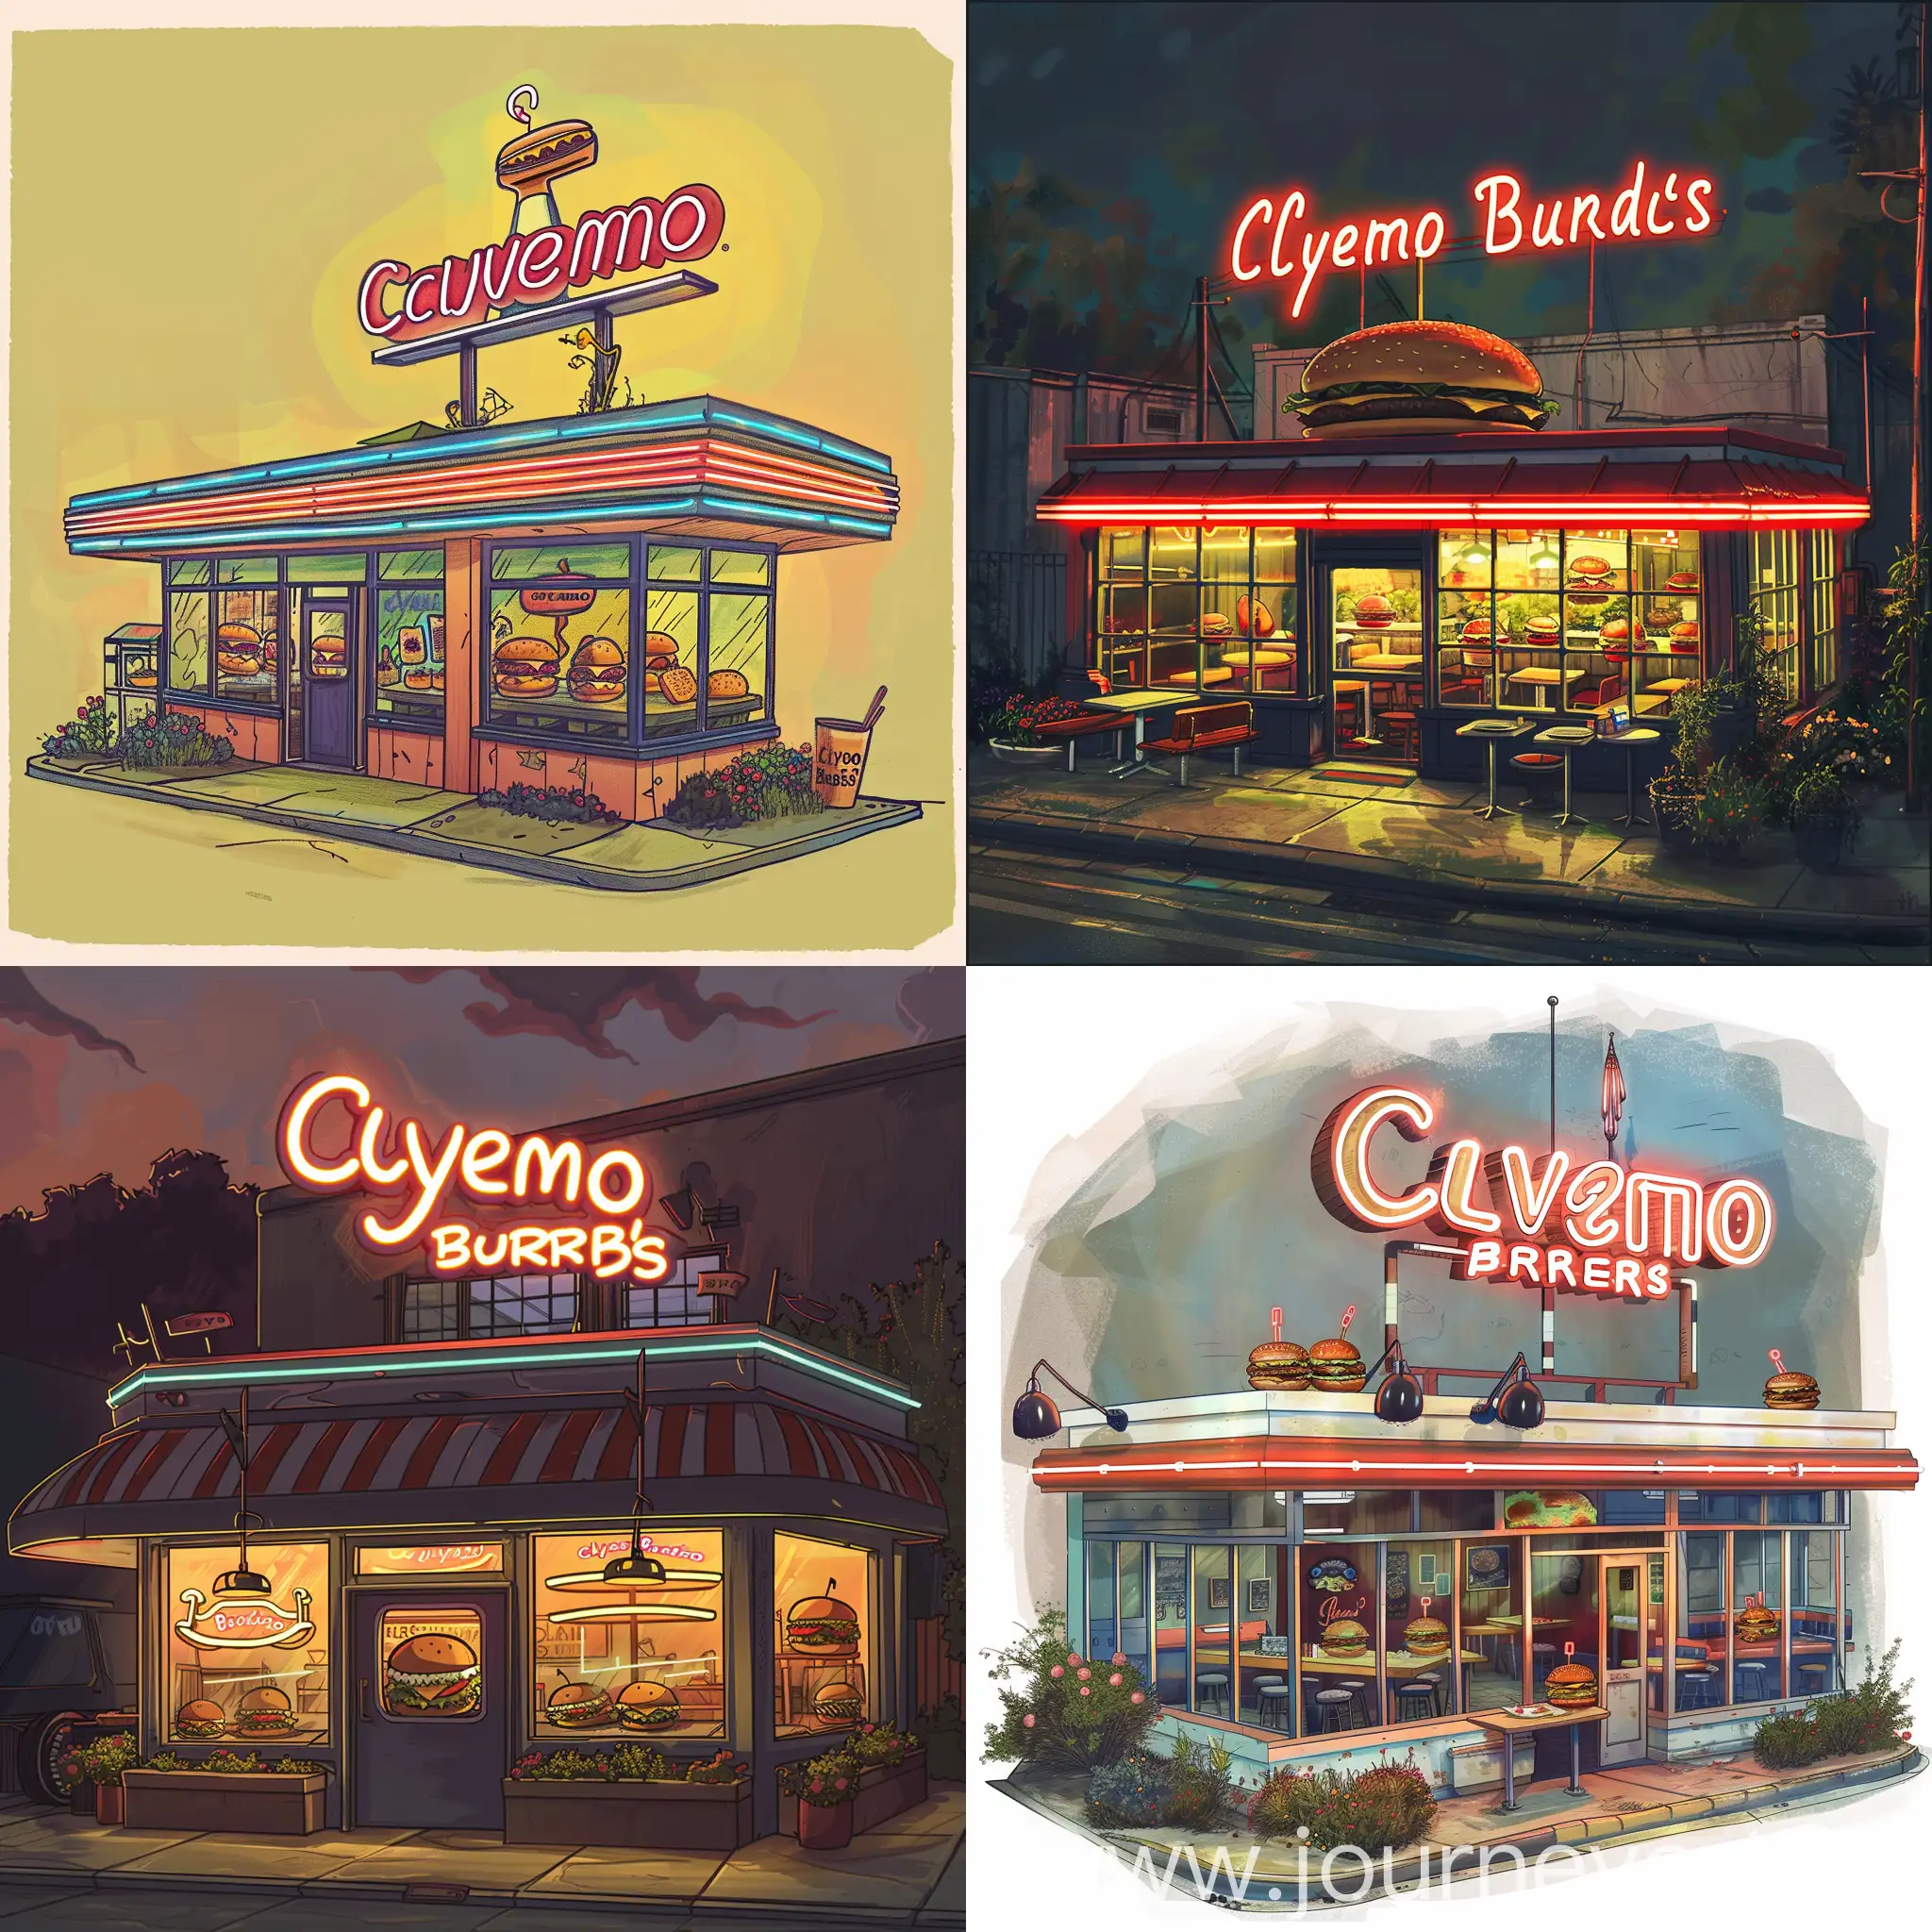 draw the fast food restaurant Clydemo Burgers is outside and on top of the restaurant there is a neon sign Clydemo Burgers